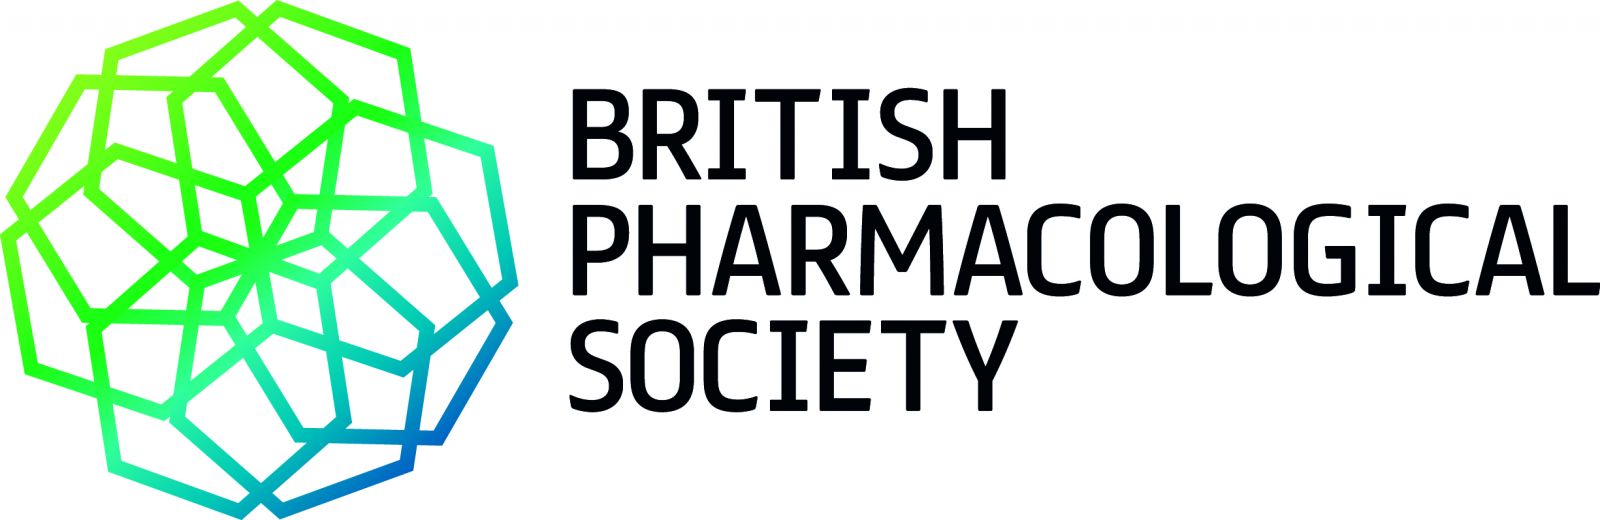 British Pharmacological Society logo 2015 high res colour